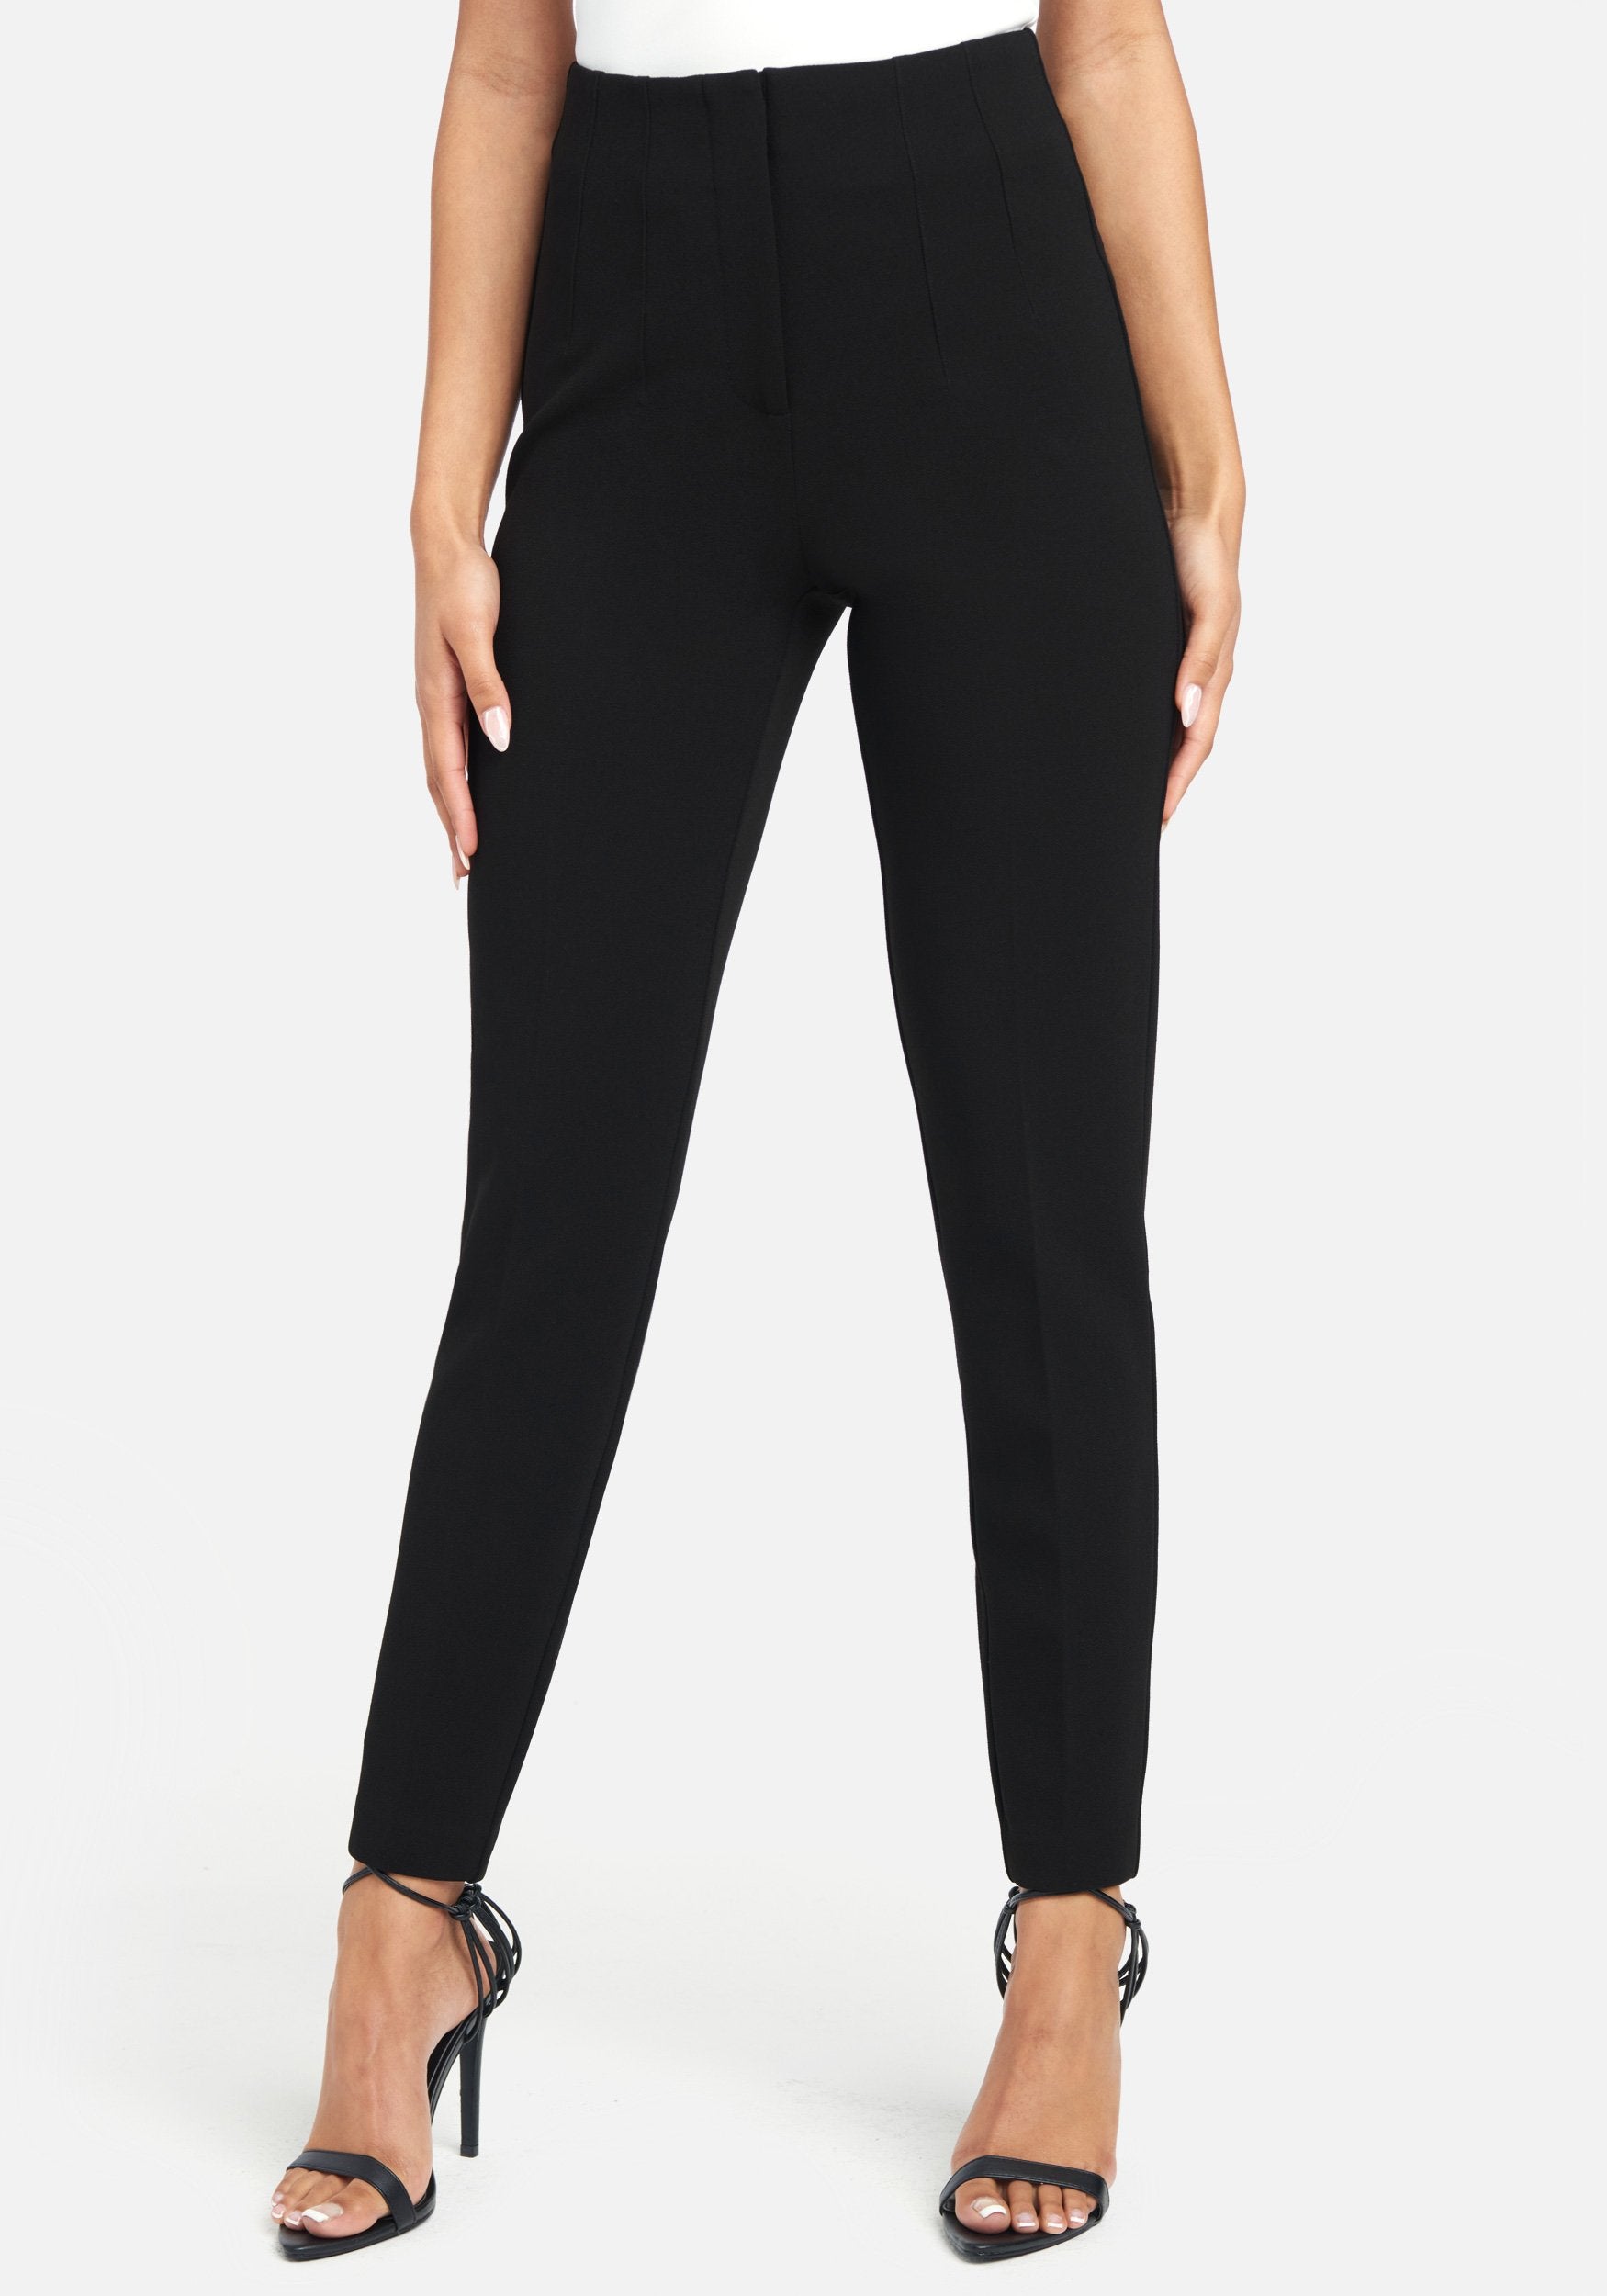 Bebe Women's Stretch Twill Straight Leg Pant, Size Large in Black Spandex